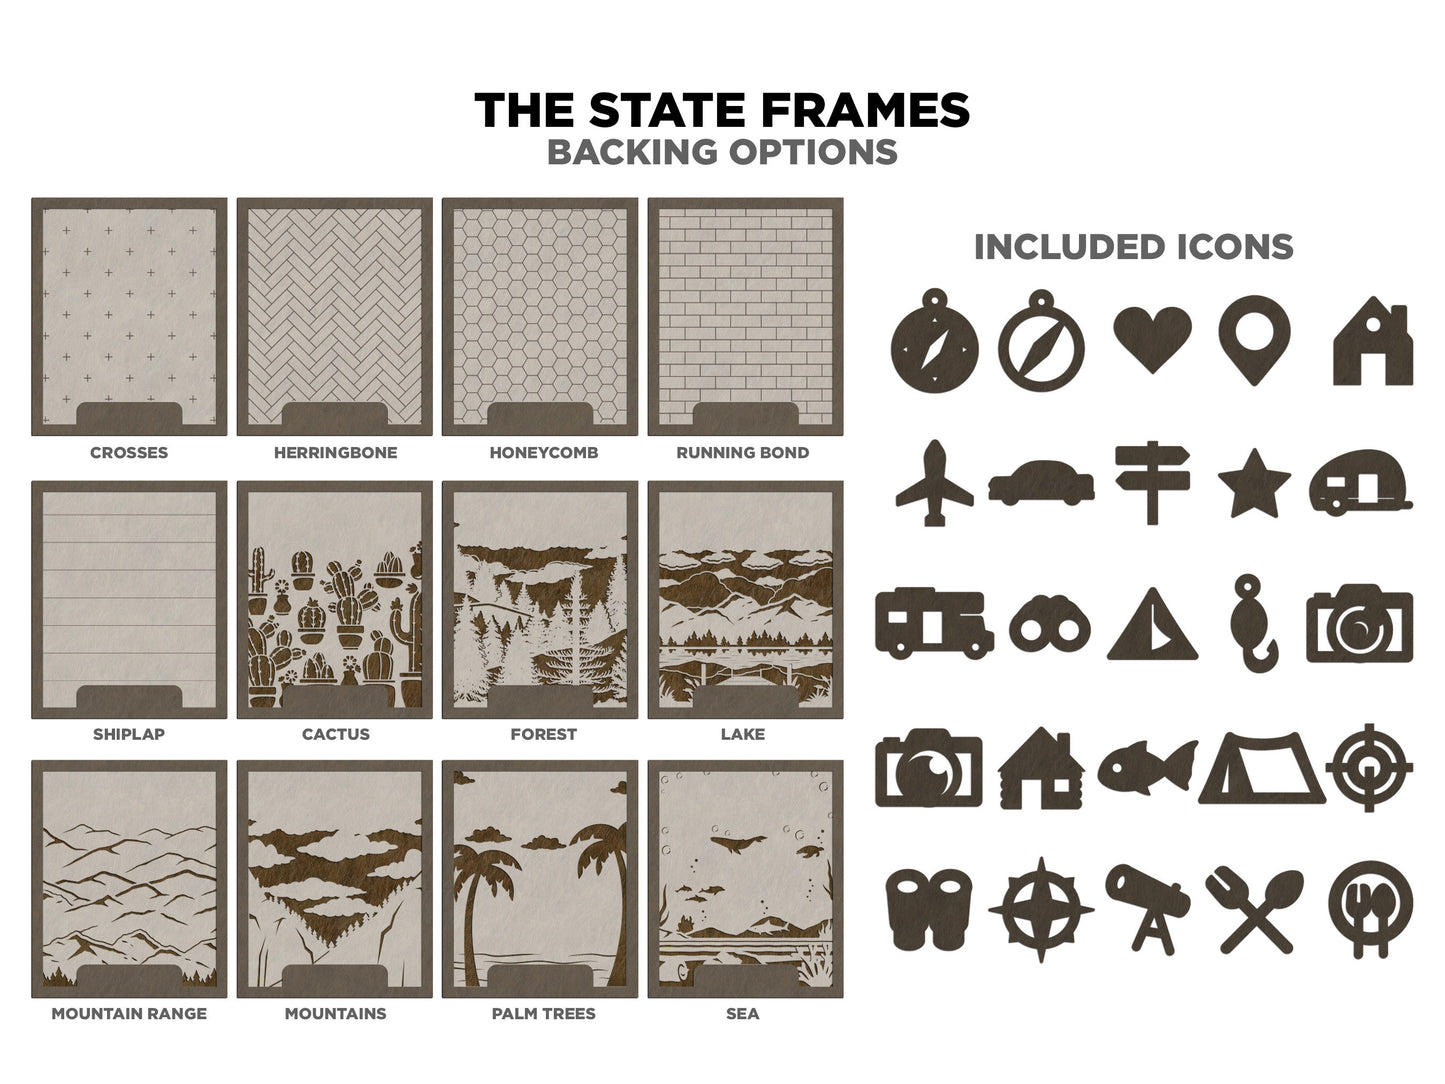 The Nevada State Frame - 13 text options, 12 backgrounds, 25 icons Included - Make over 7,500 designs - Glowforge & Lightburn Tested